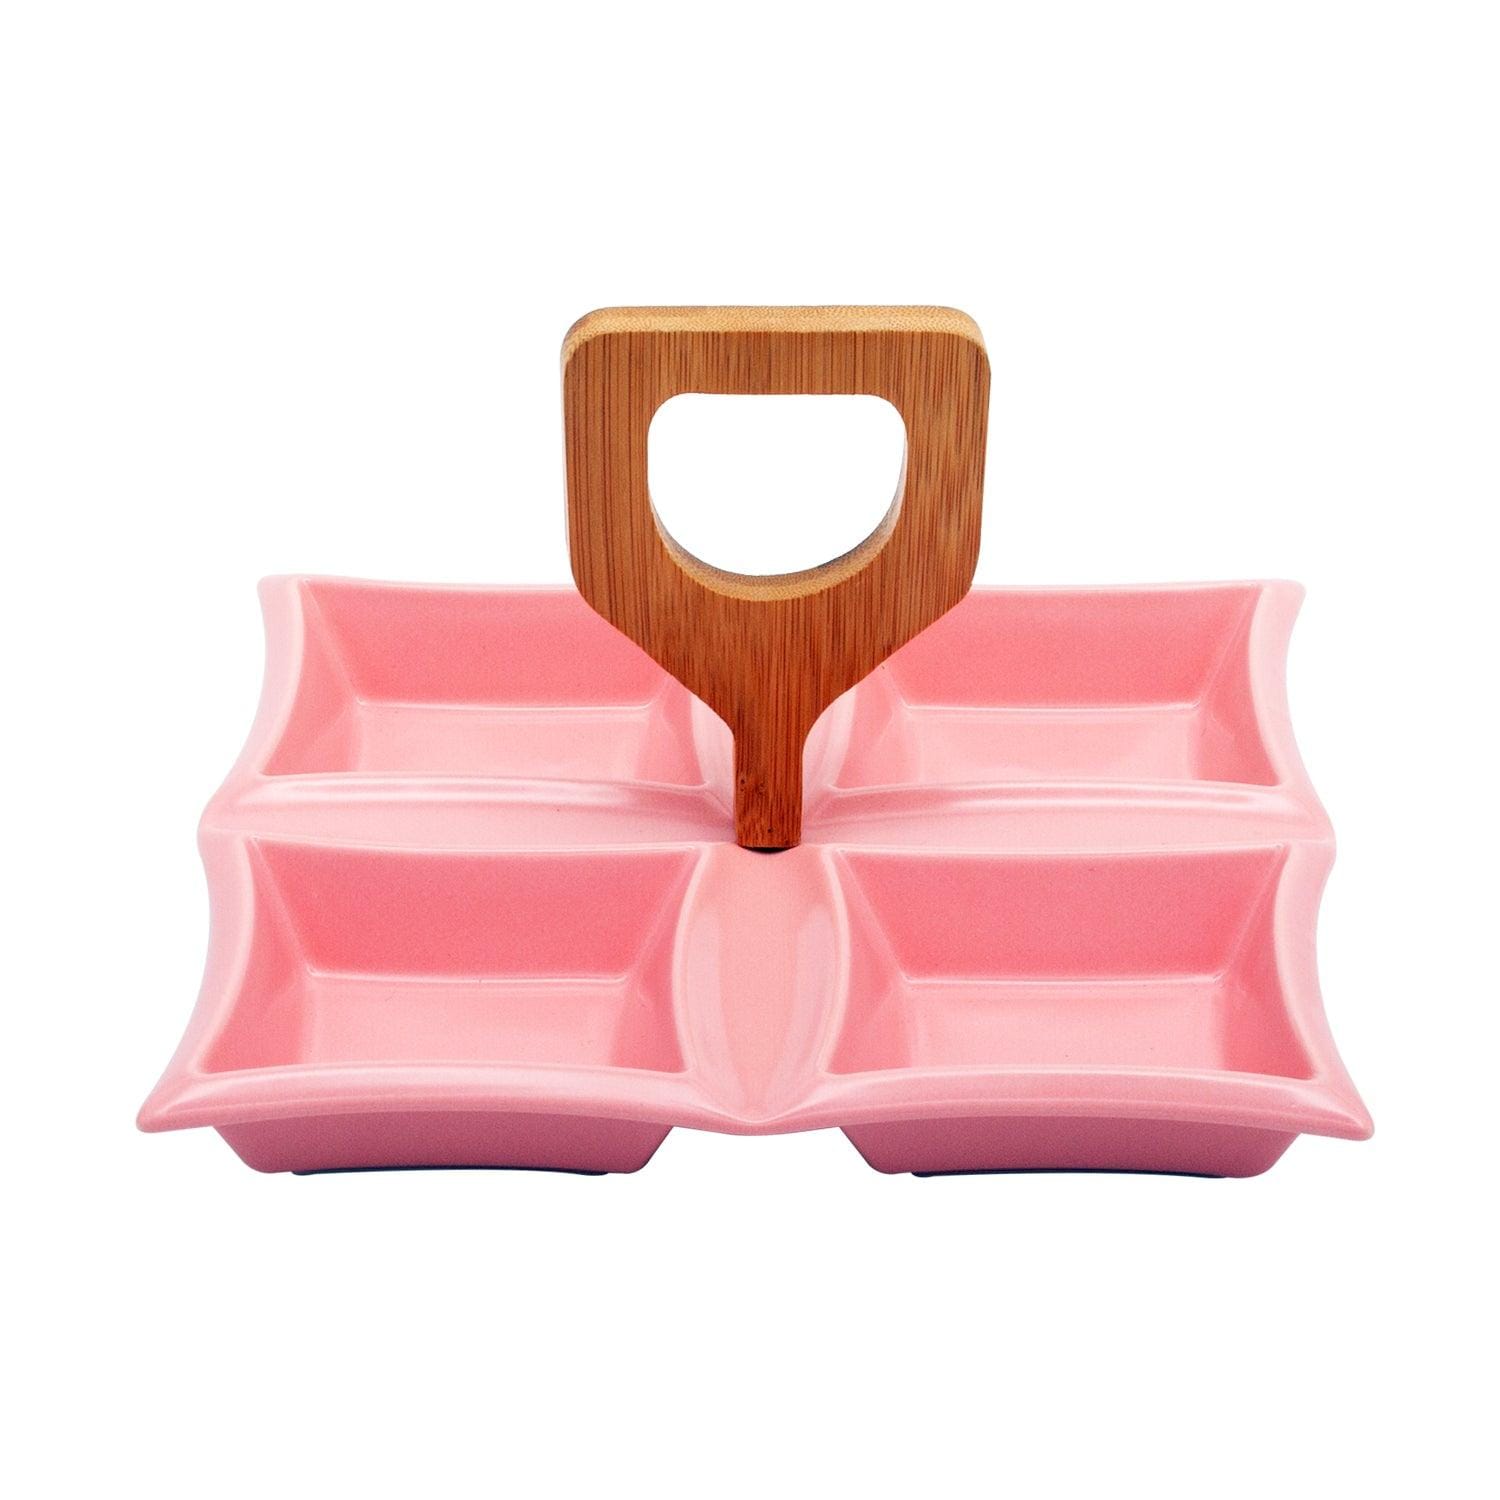 4 Compartment Classic Squares Pink Ceramic Serving Platter with Wooden Handle